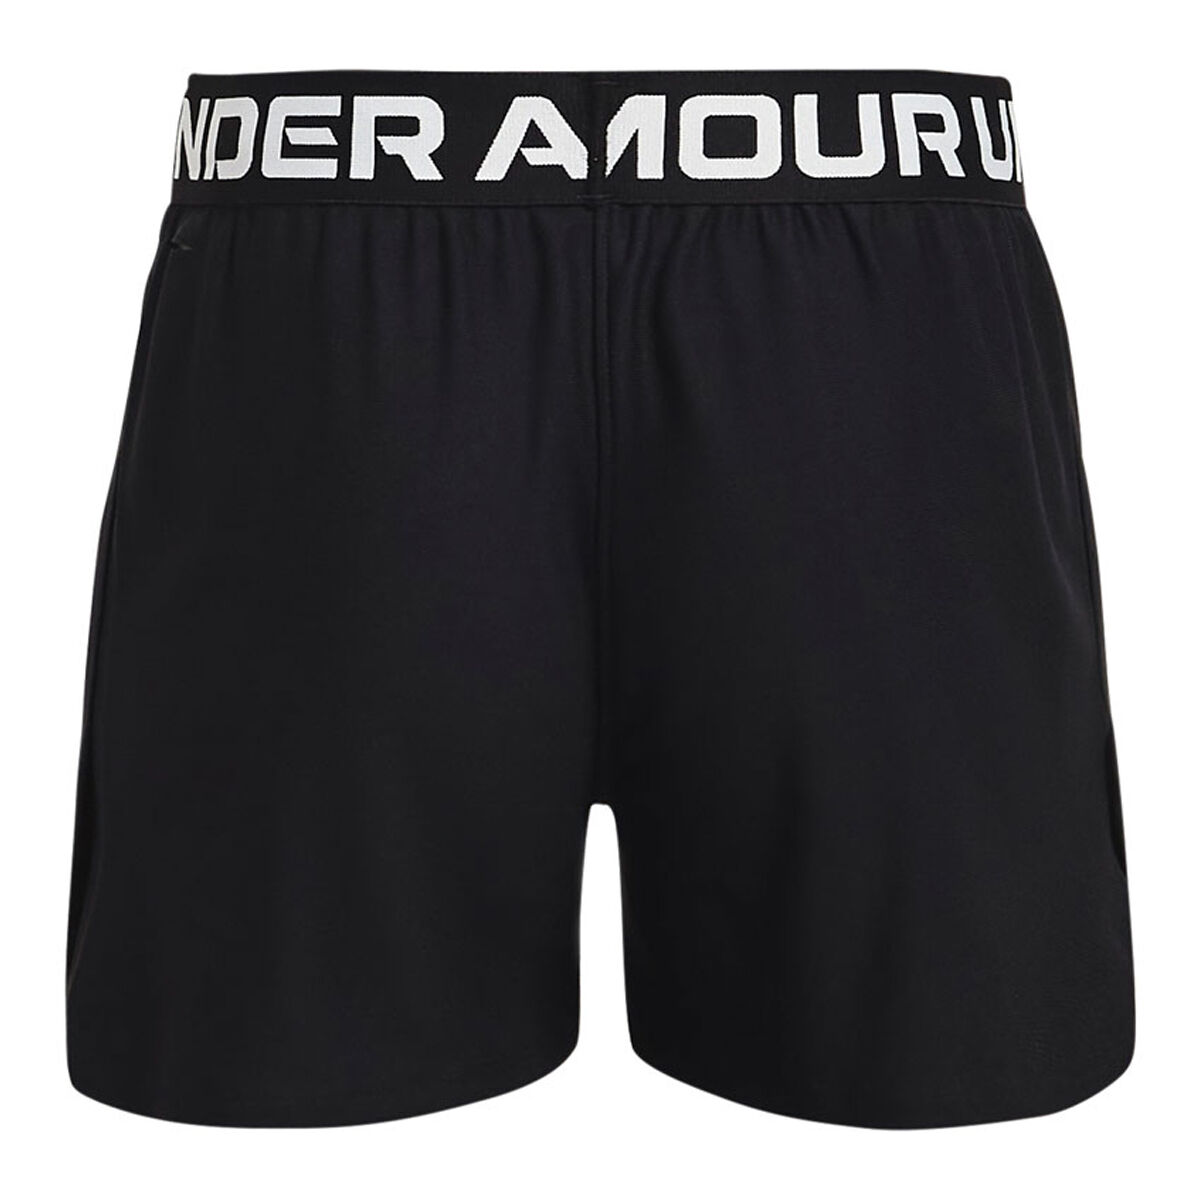 Under Armour Girls' Play Up Shorts 2.5 in.